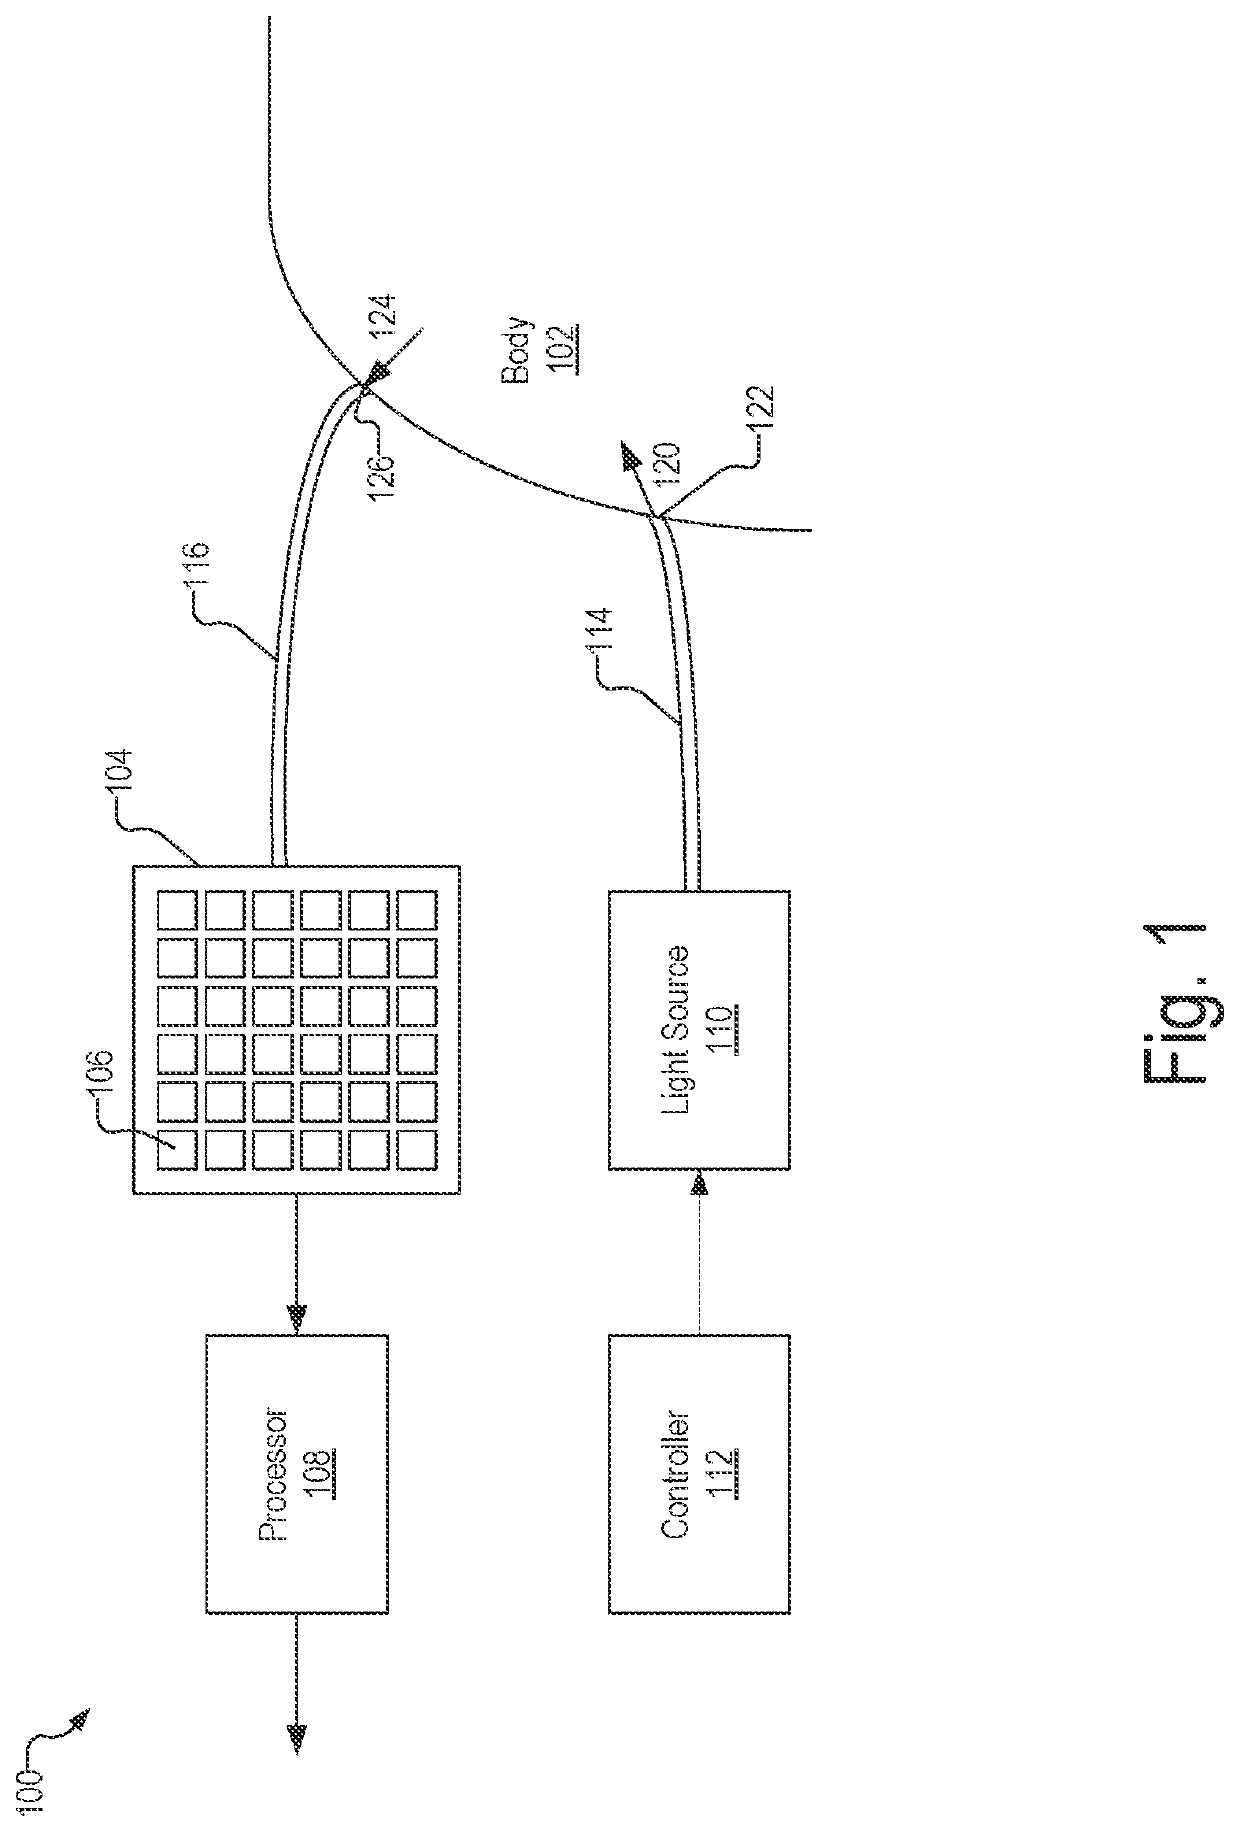 Devices, systems, and methods using wearable time domain-based activity tracker